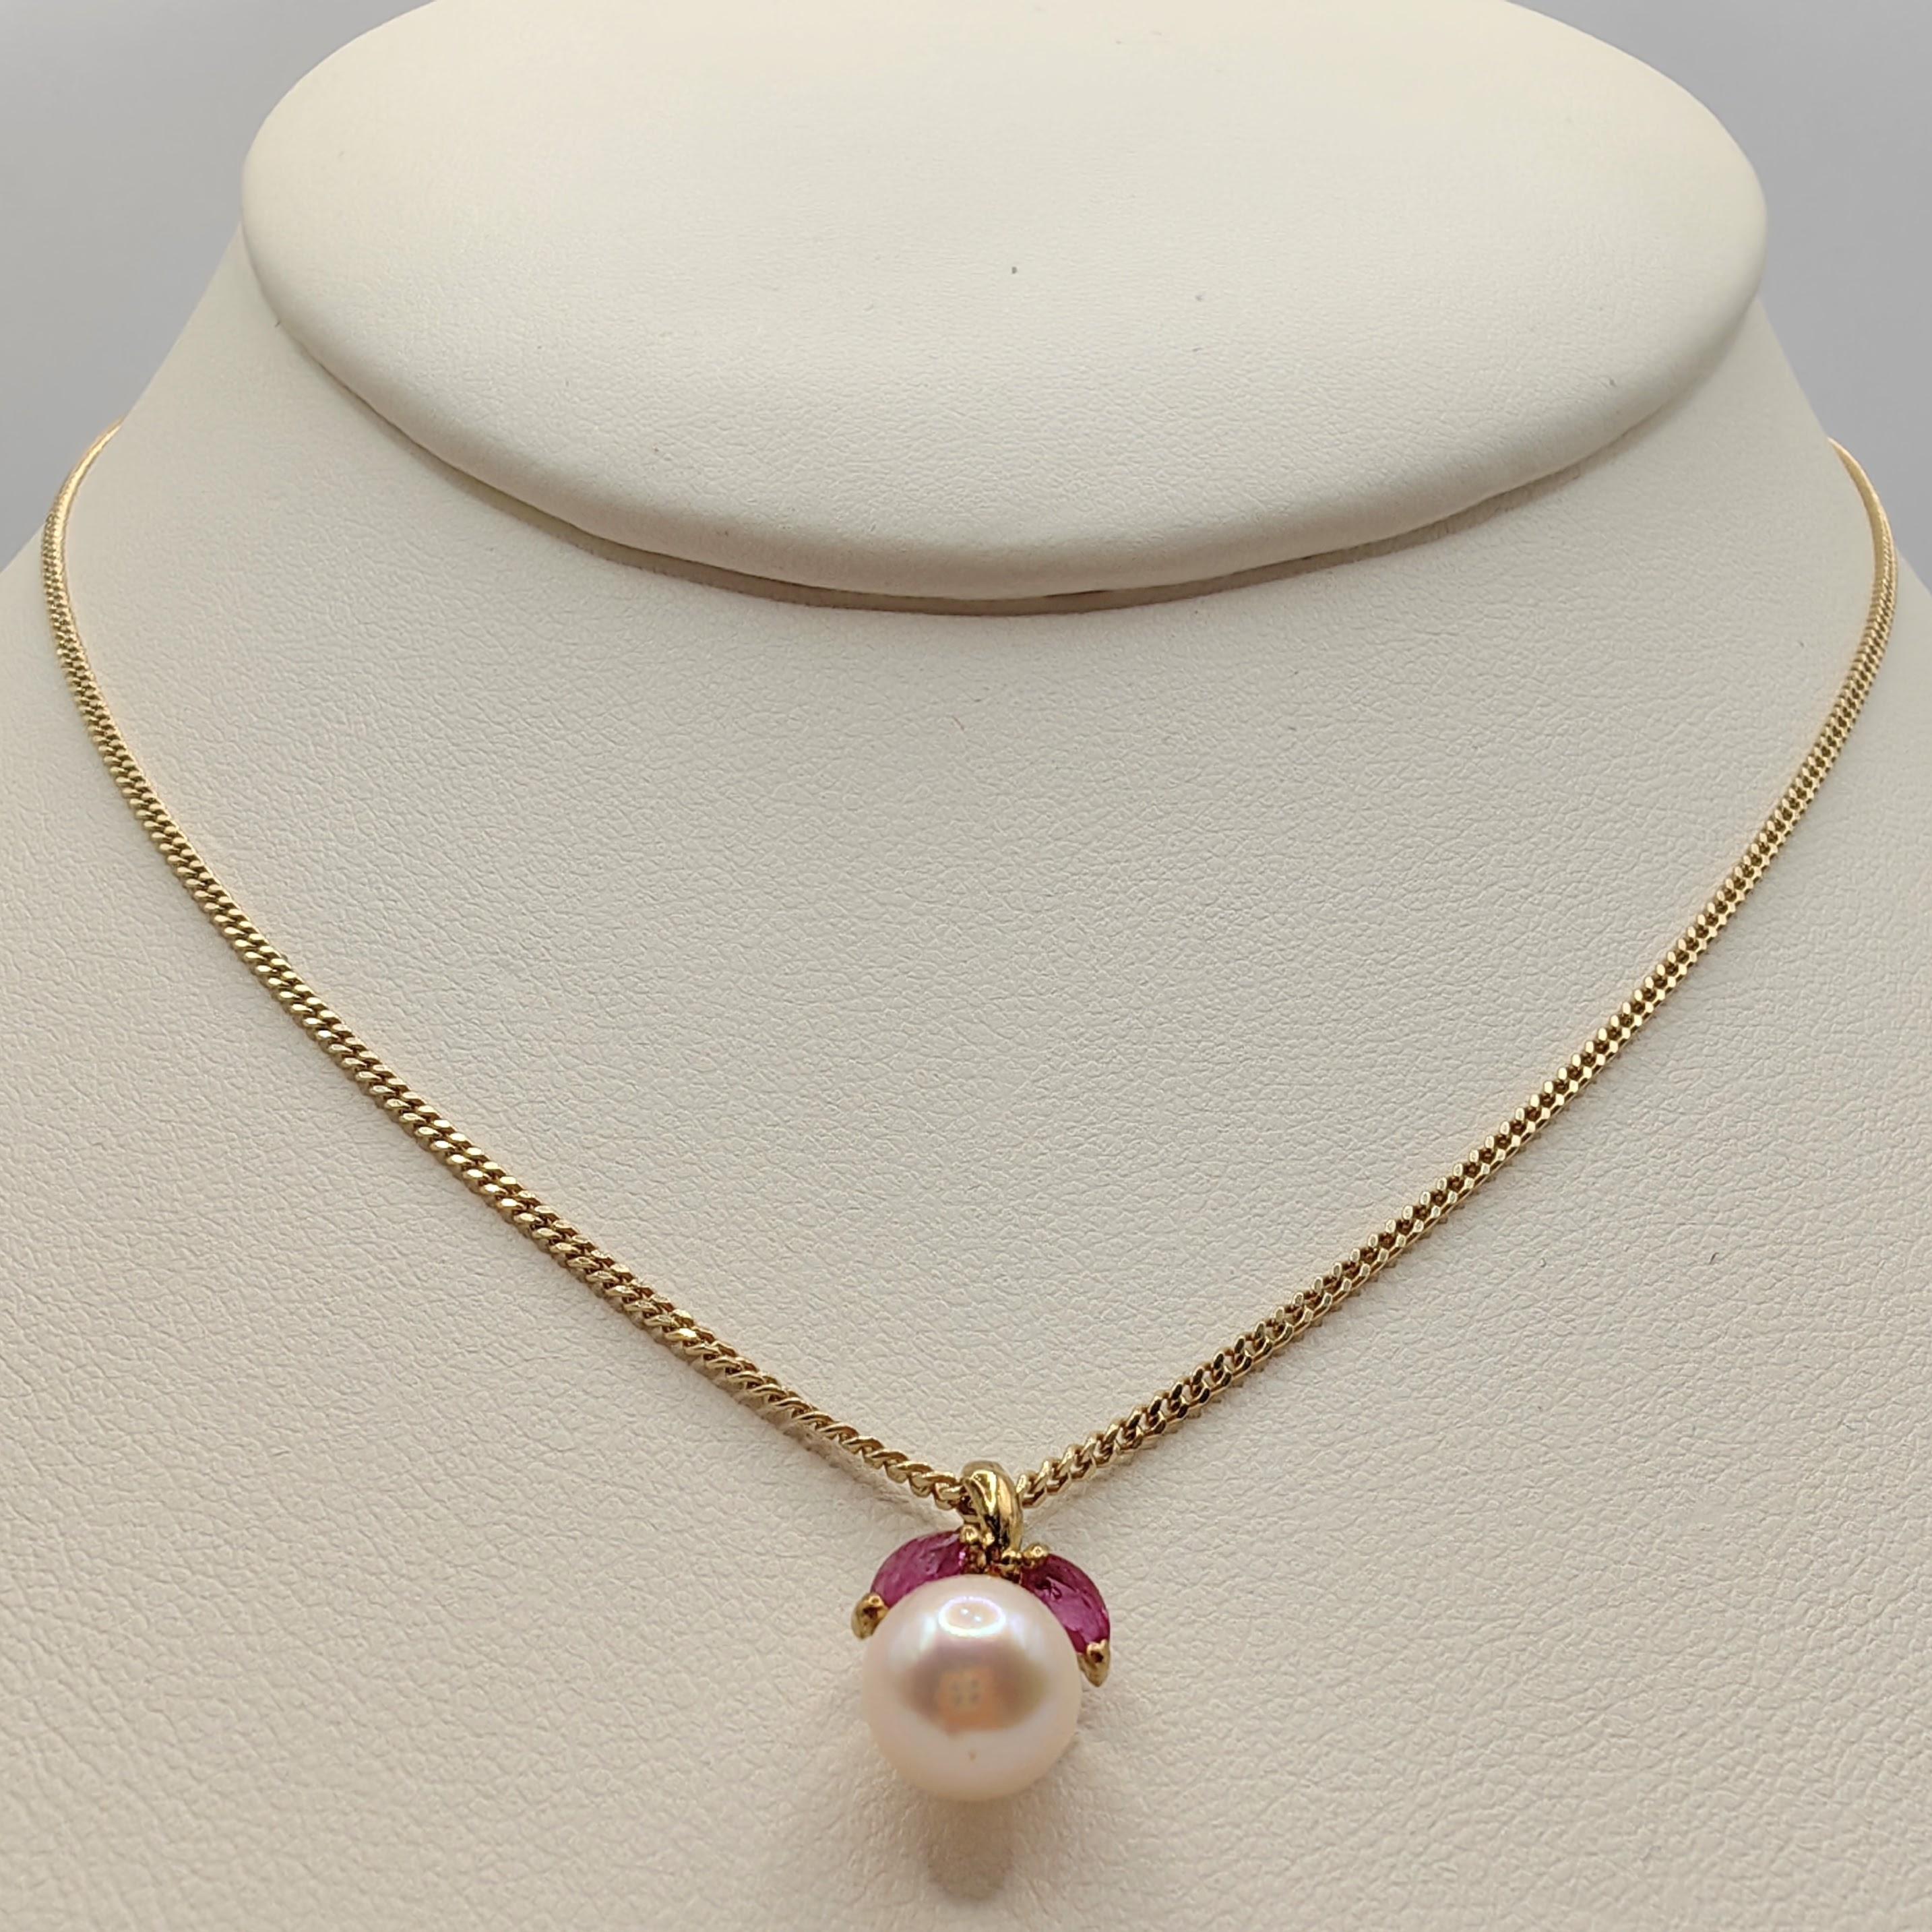 Introducing our Vintage Marquise Cut Rubies & Pearl Necklace Pendant in 14K Yellow Gold, a timeless piece of jewelry that blends vintage charm with contemporary elegance.

At the heart of this pendant lies a lustrous Freshwater Cultured Round Pearl,